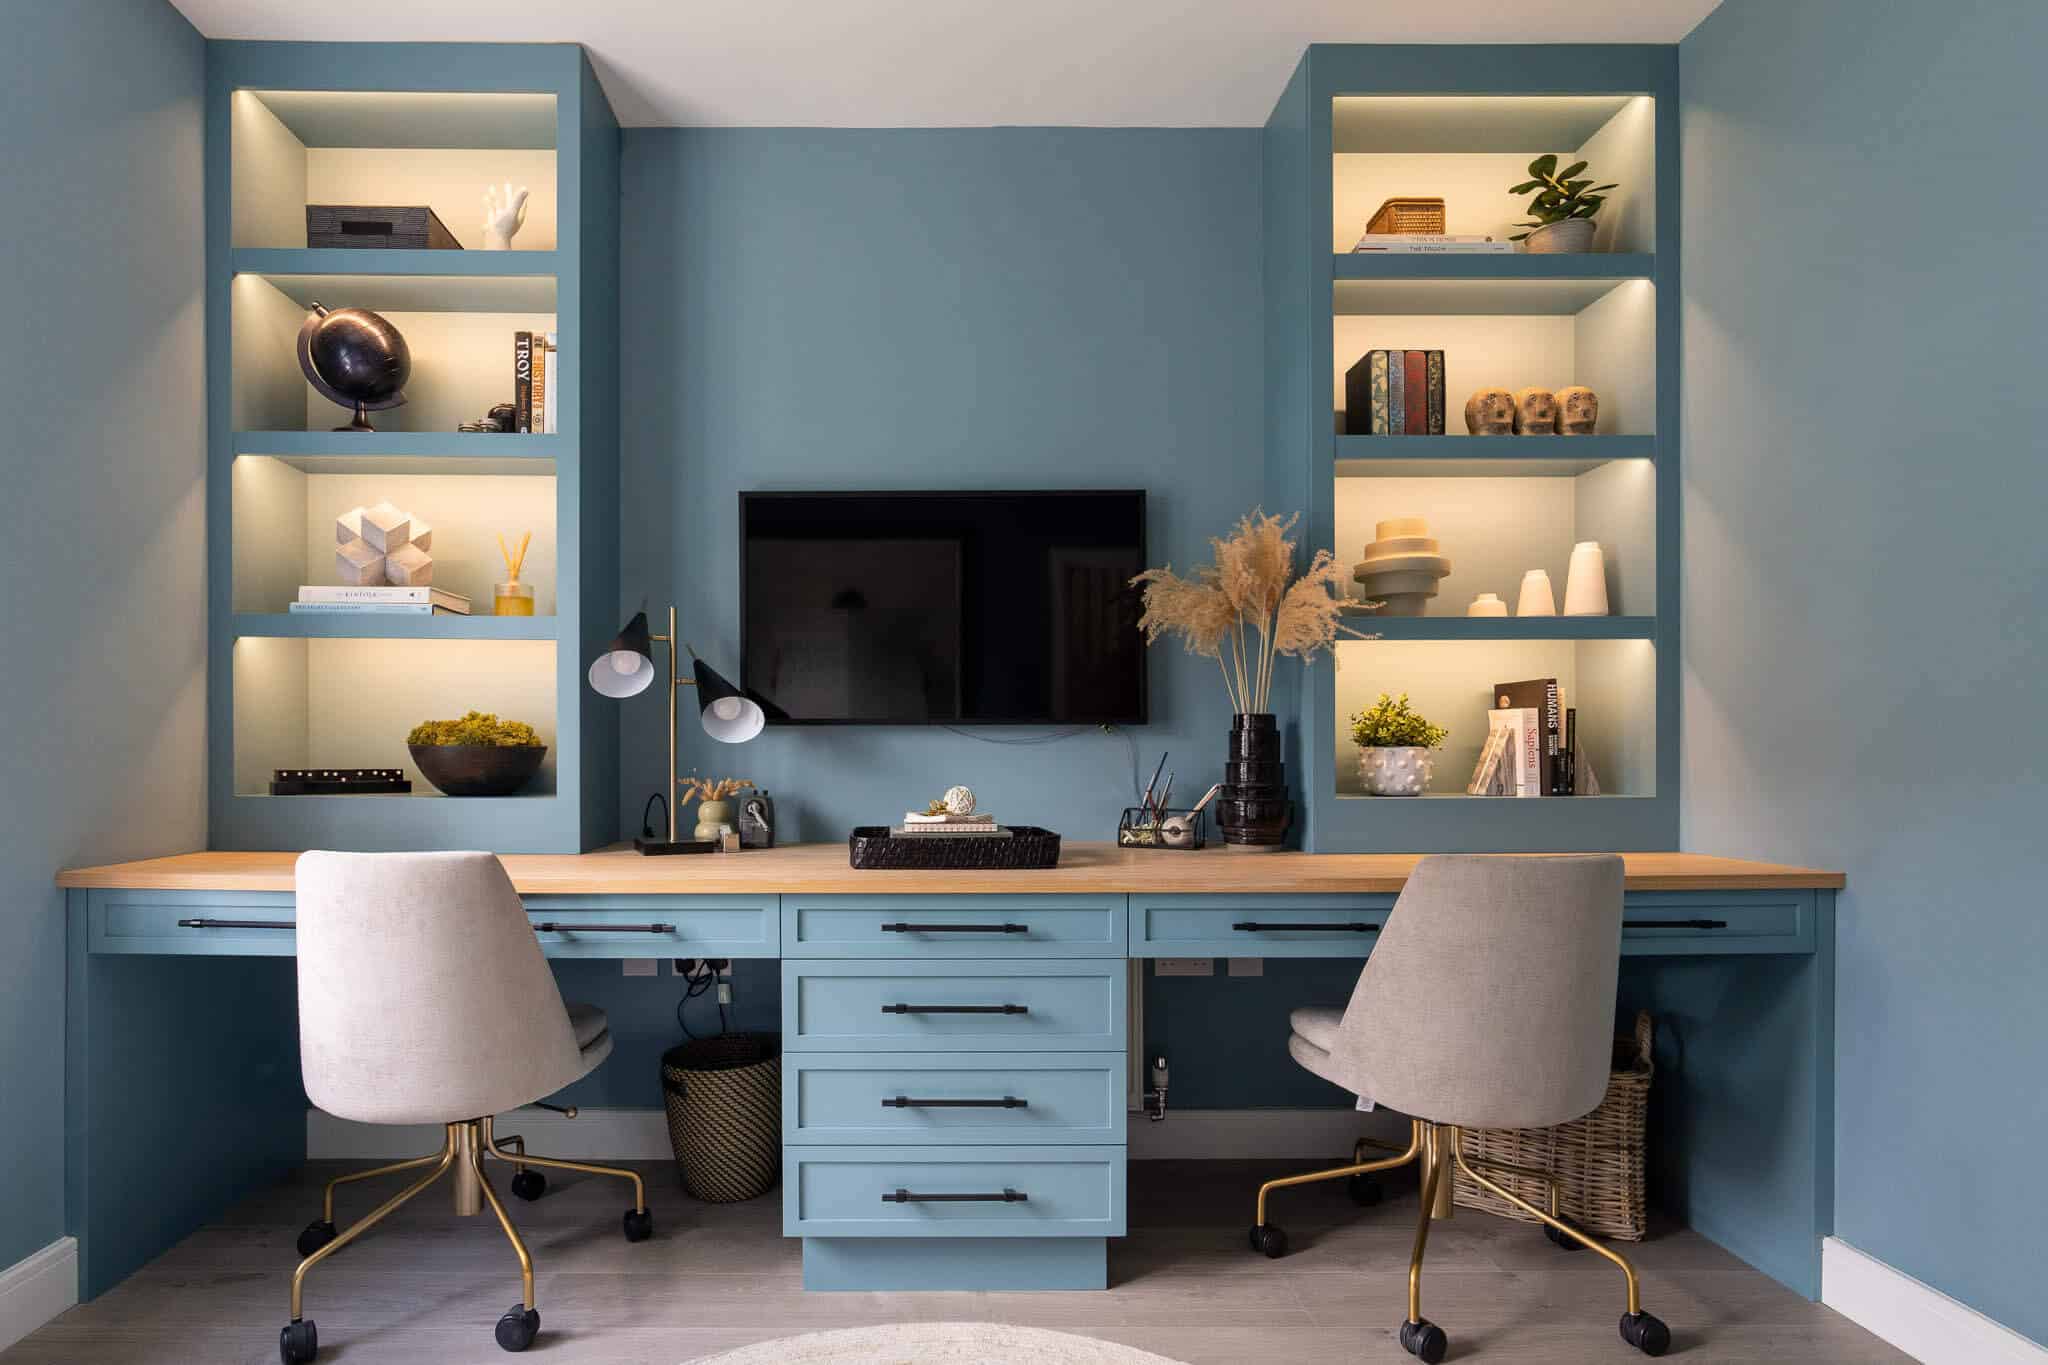 A picture of a blue bespoke desk in a study, with a car on the left and right and shelving enhanced with lighting